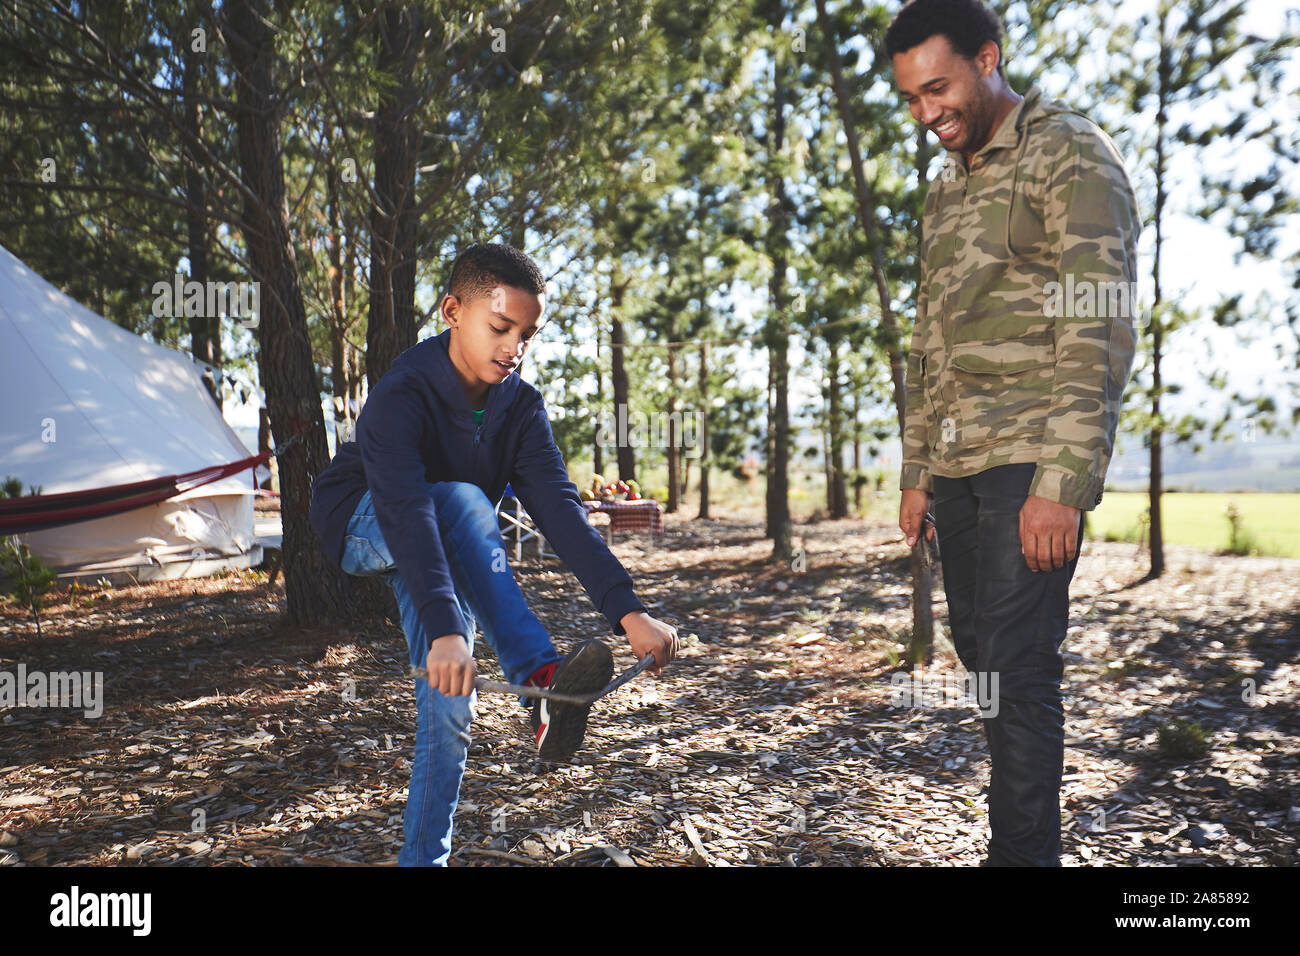 Father watching son breaking kindling at campsite in woods Stock Photo